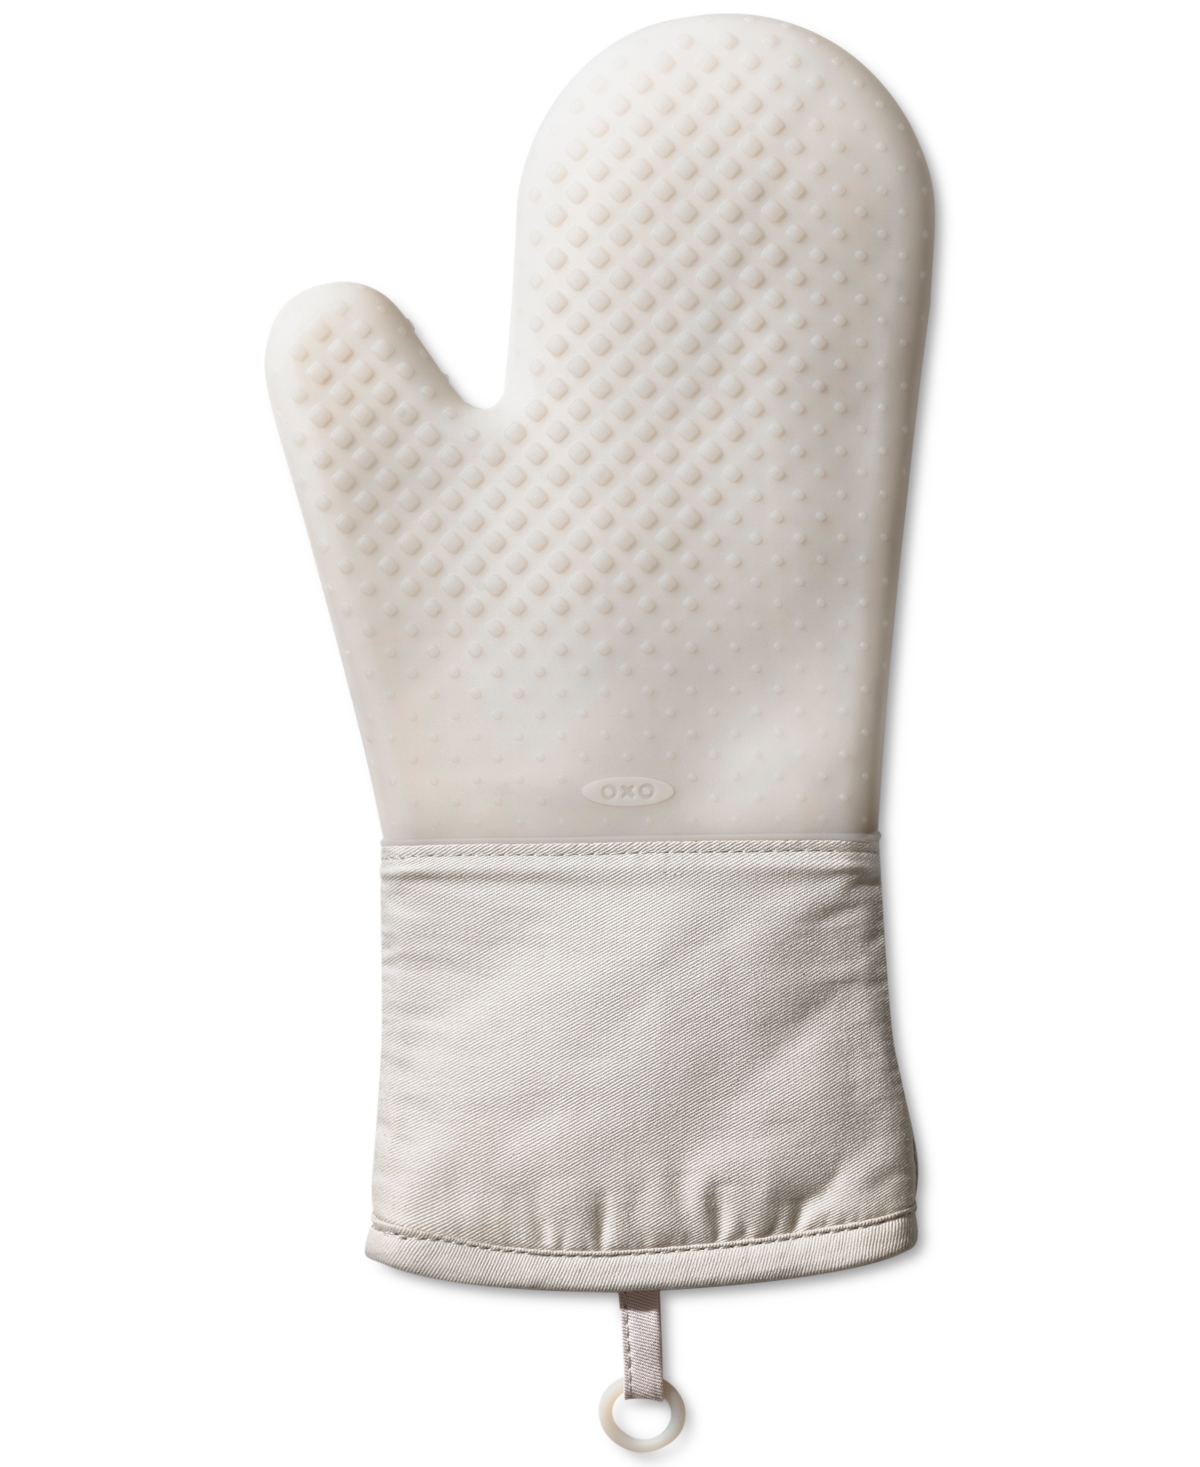 All-Clad Ribbed Silicone Cotton Twill Oven Mitt, Set of 2 - Macy's